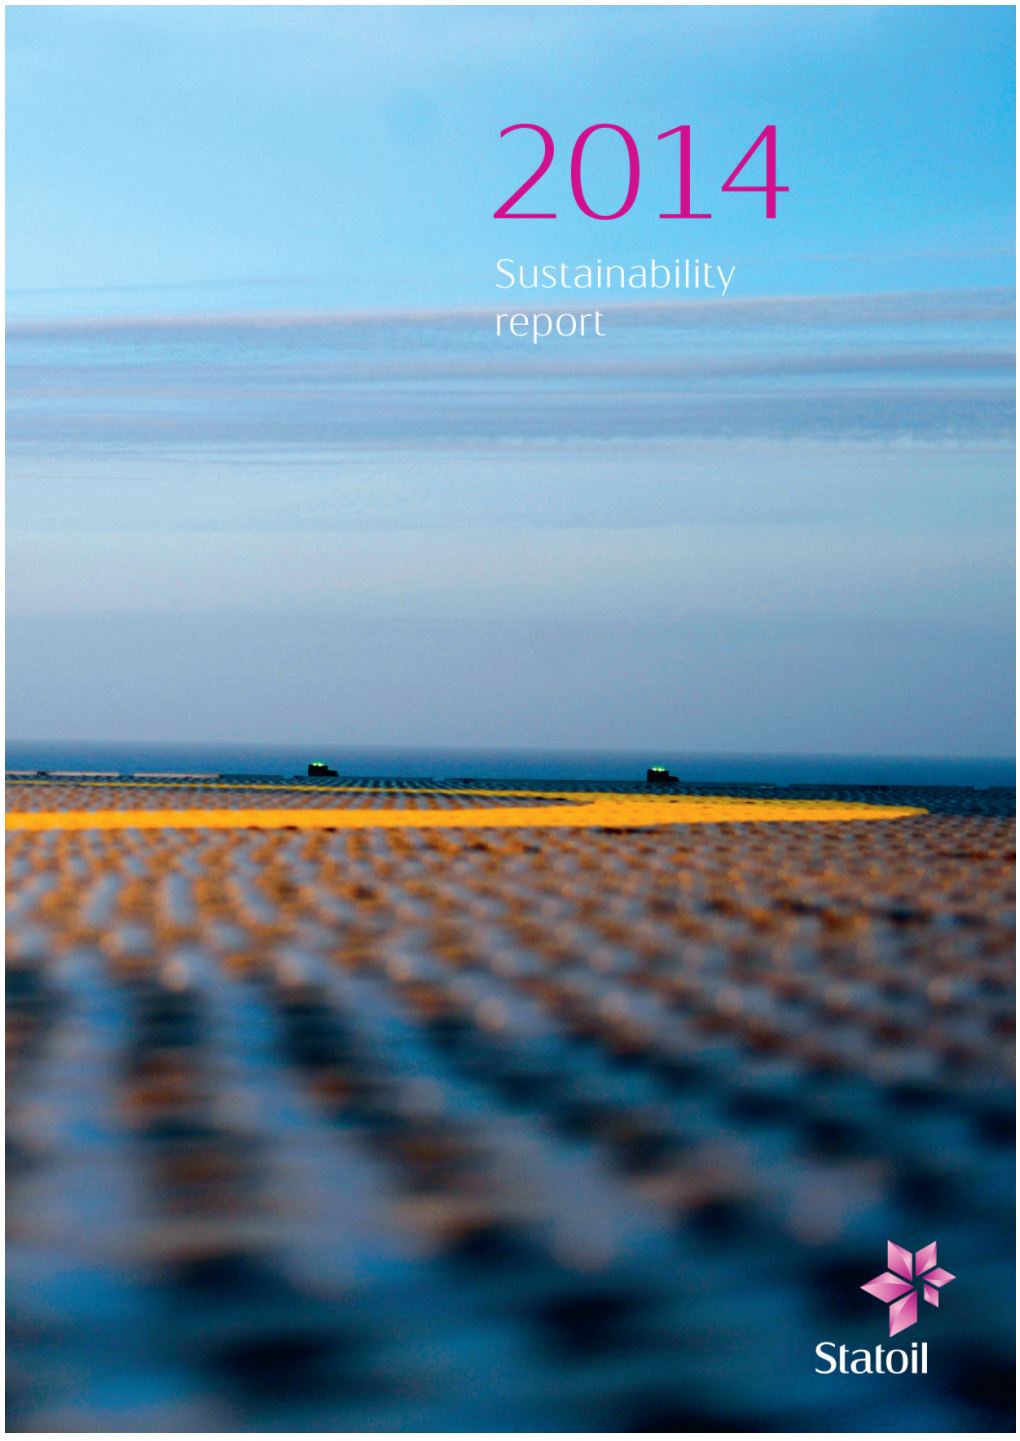 Sustainability Report 2014 PDF 8 MB